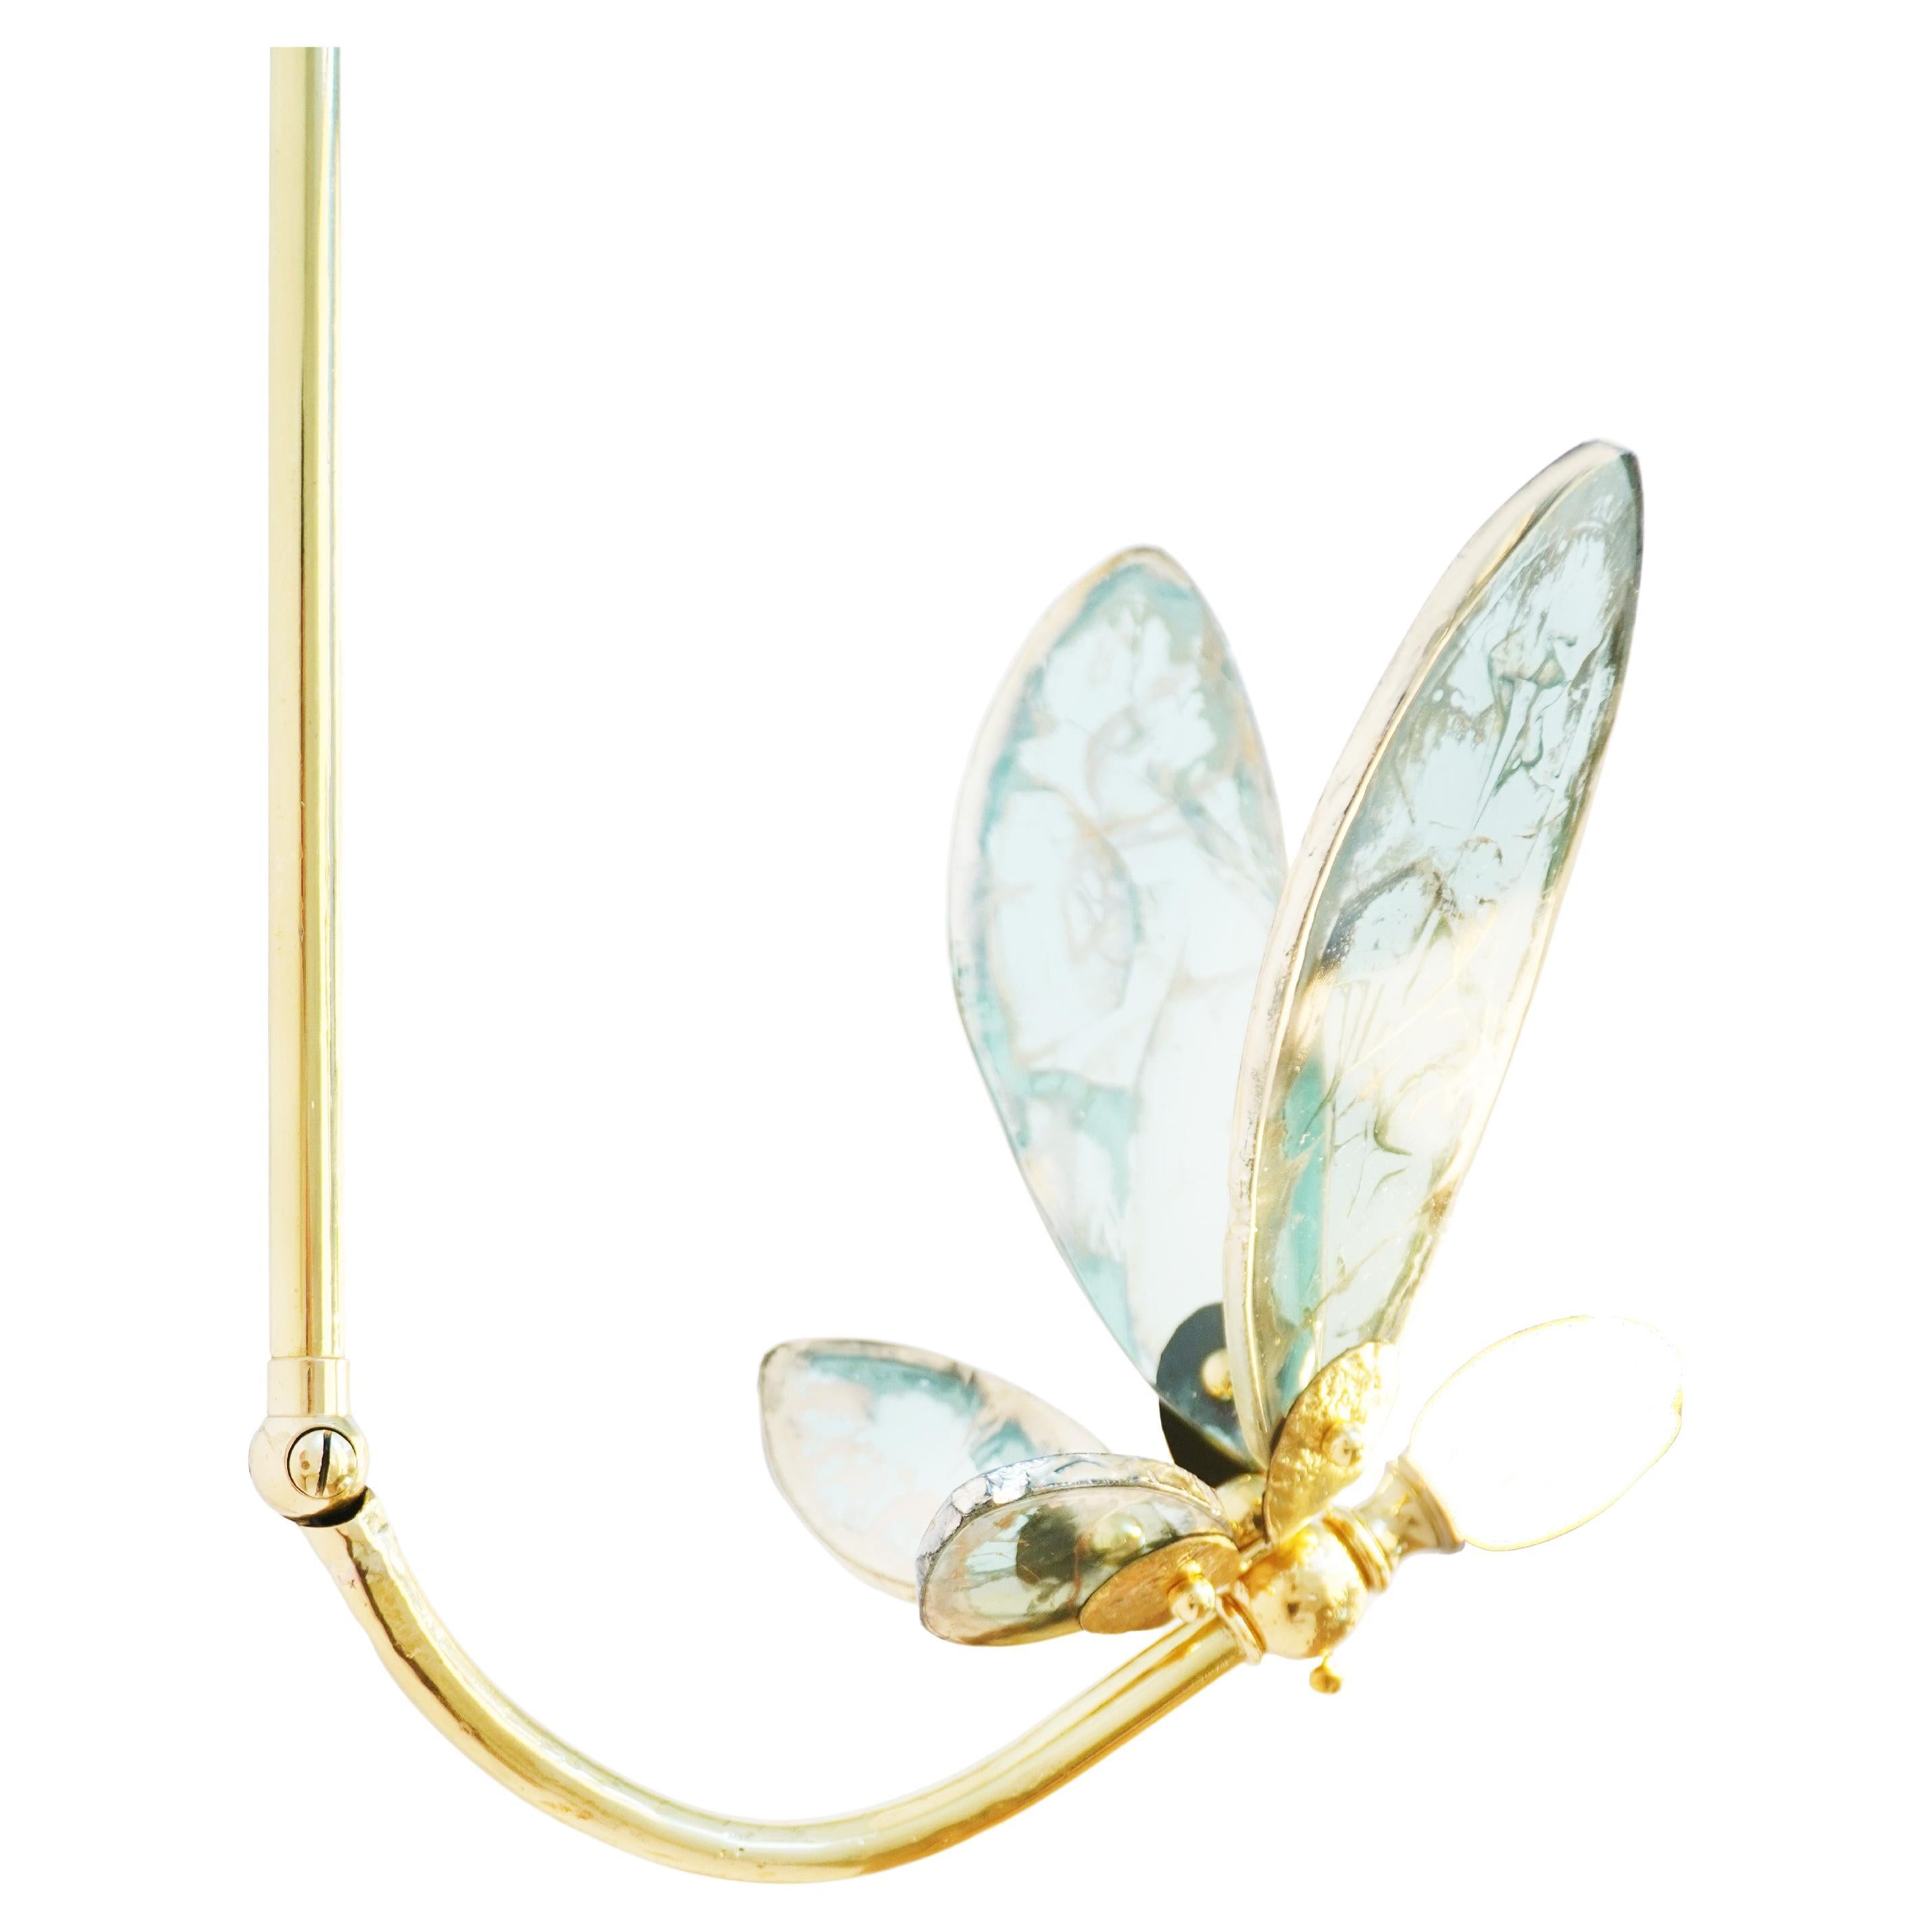 "Trilly" Hanging Lamp Jade Silvered Glass, Brass Body